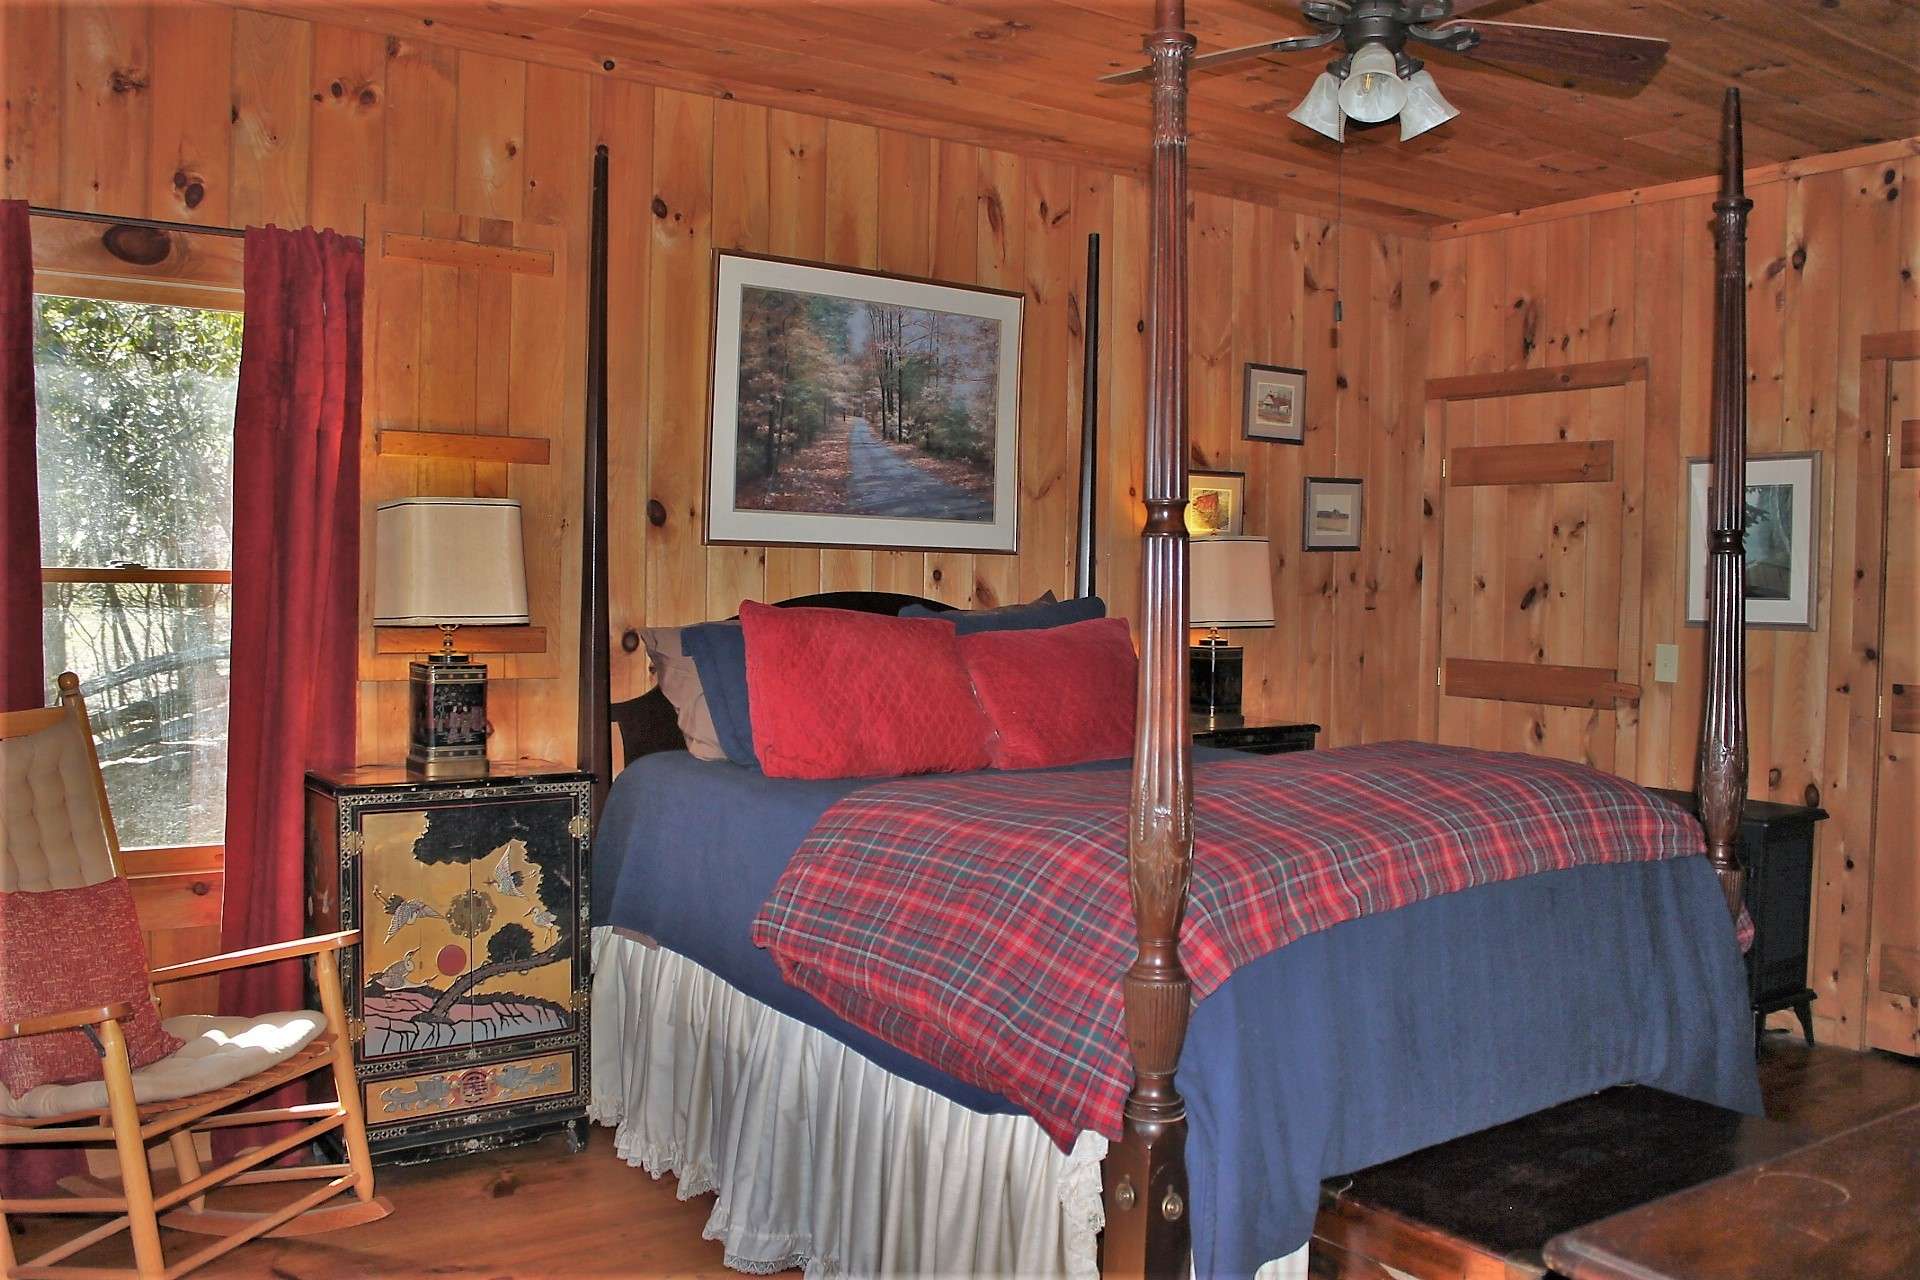 There is an additional large guest bedroom on the lower level with walk-out access to a covered deck.